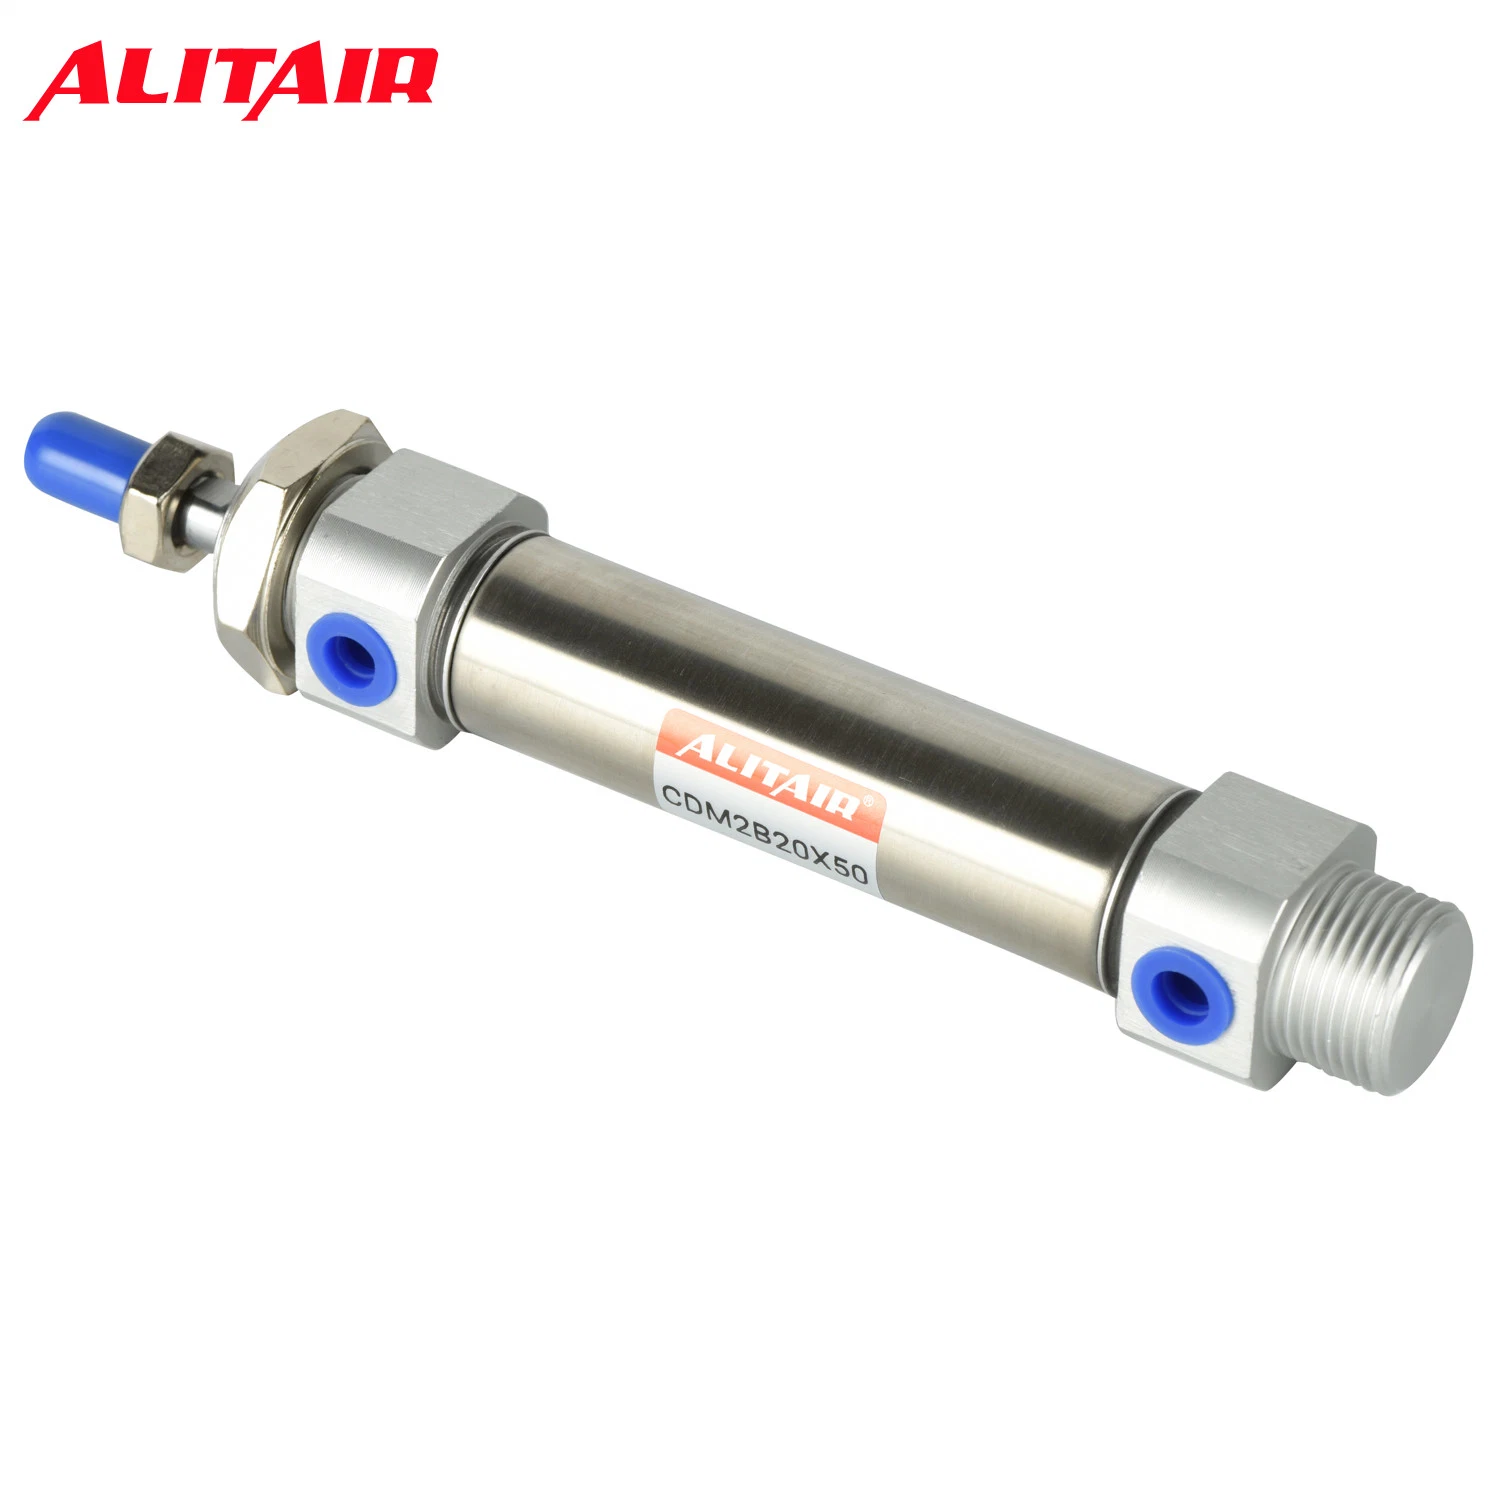 Alitair Pneumatic Mini Cylinder with Magnetic Stainless Steel Cdm2b Piston Cylinder